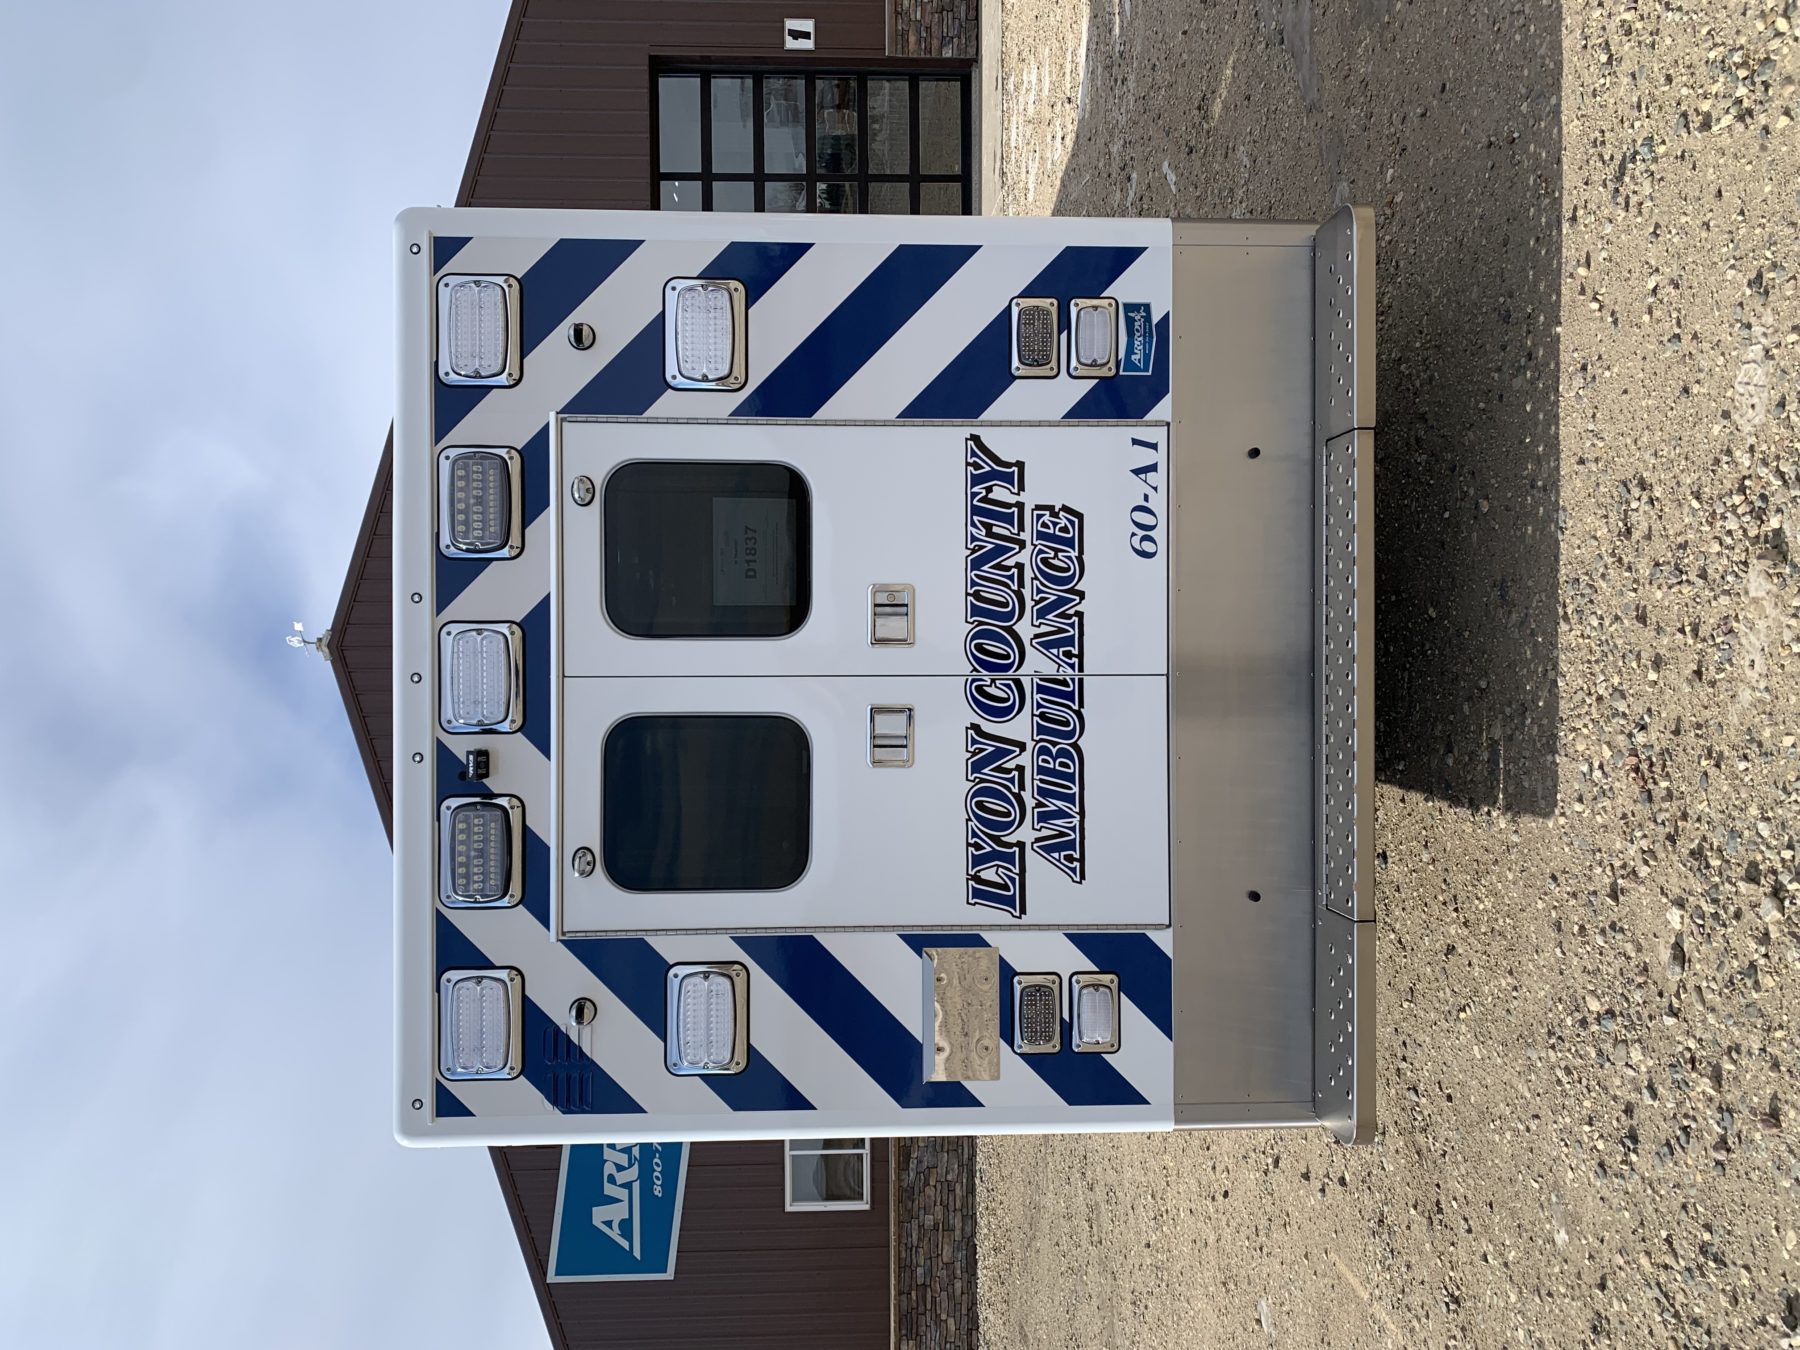 2021 Ram 4500 4x4 Heavy Duty Ambulance For Sale – Picture 5